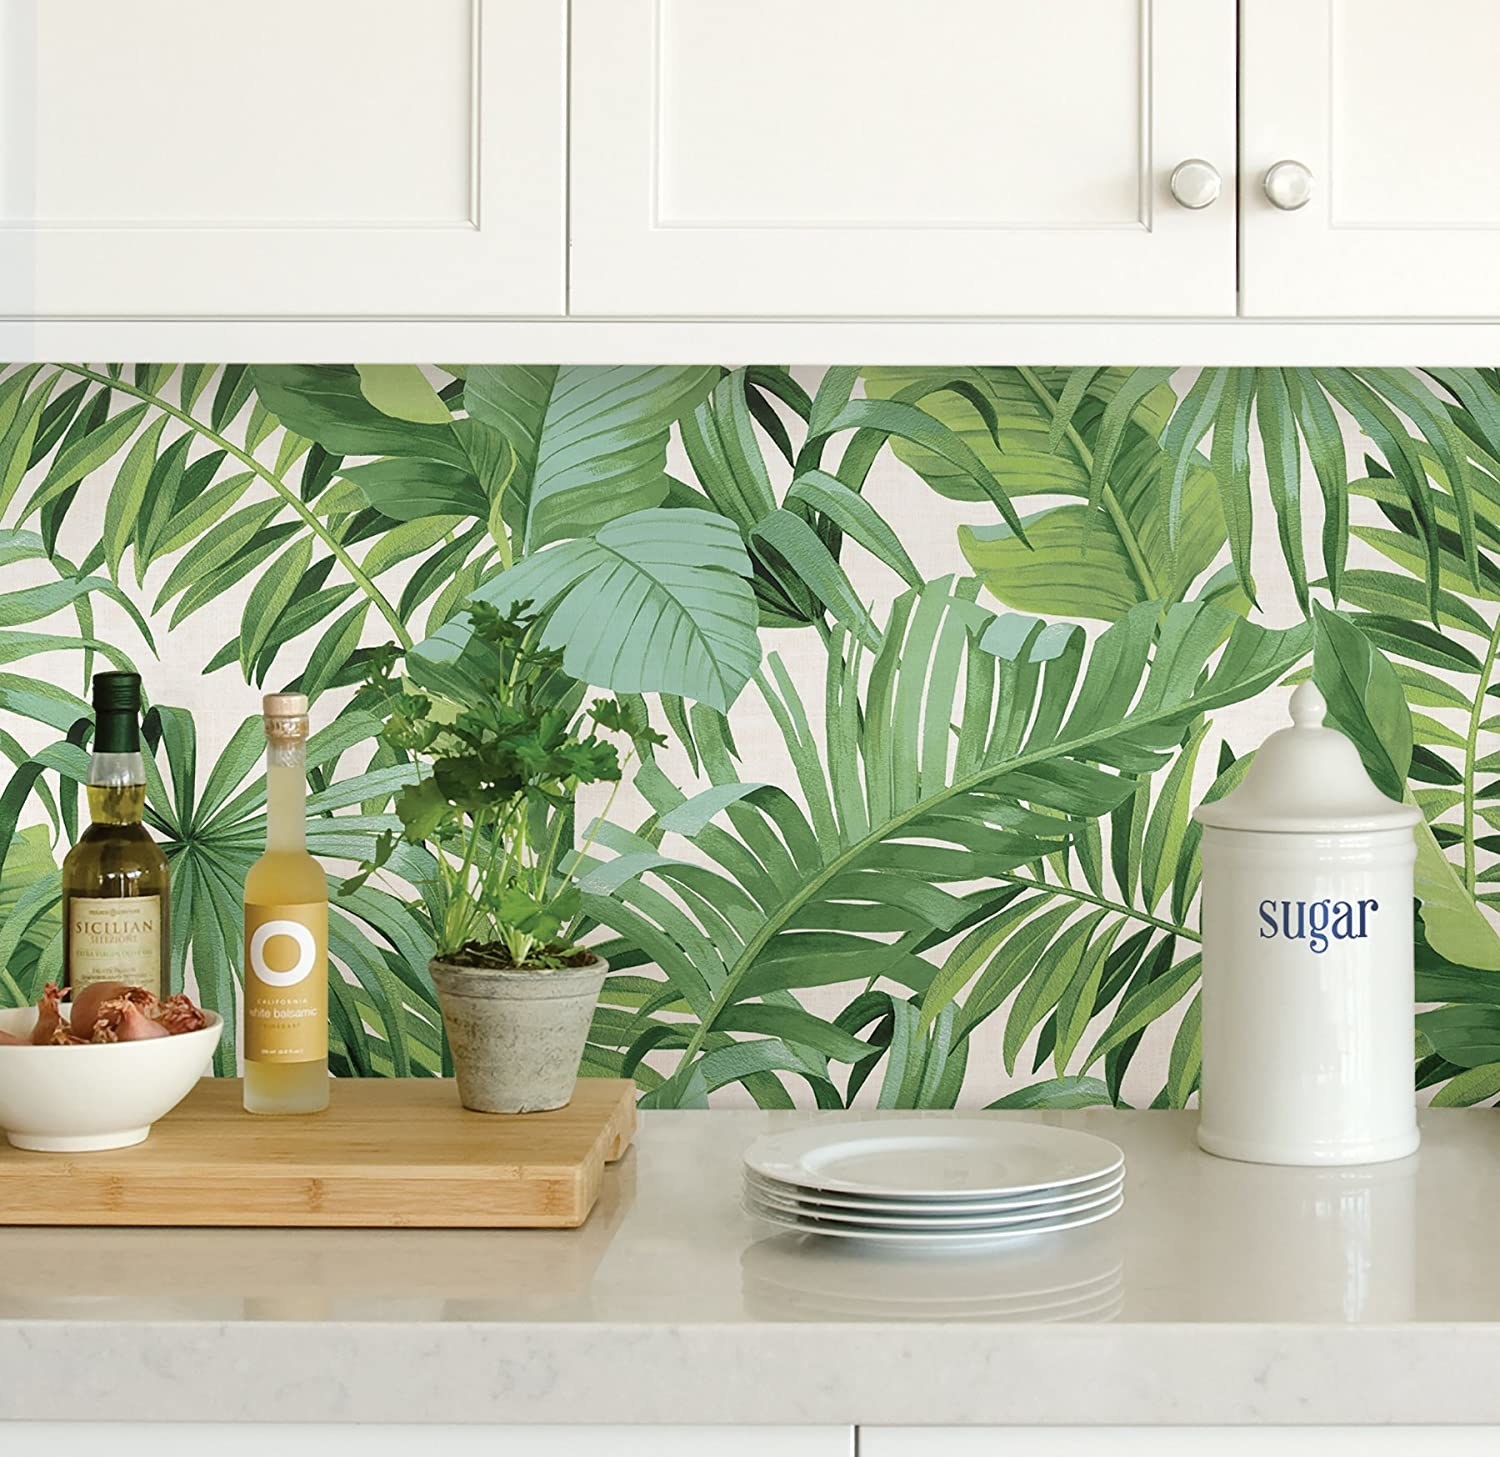 The wallpaper in a kitchen